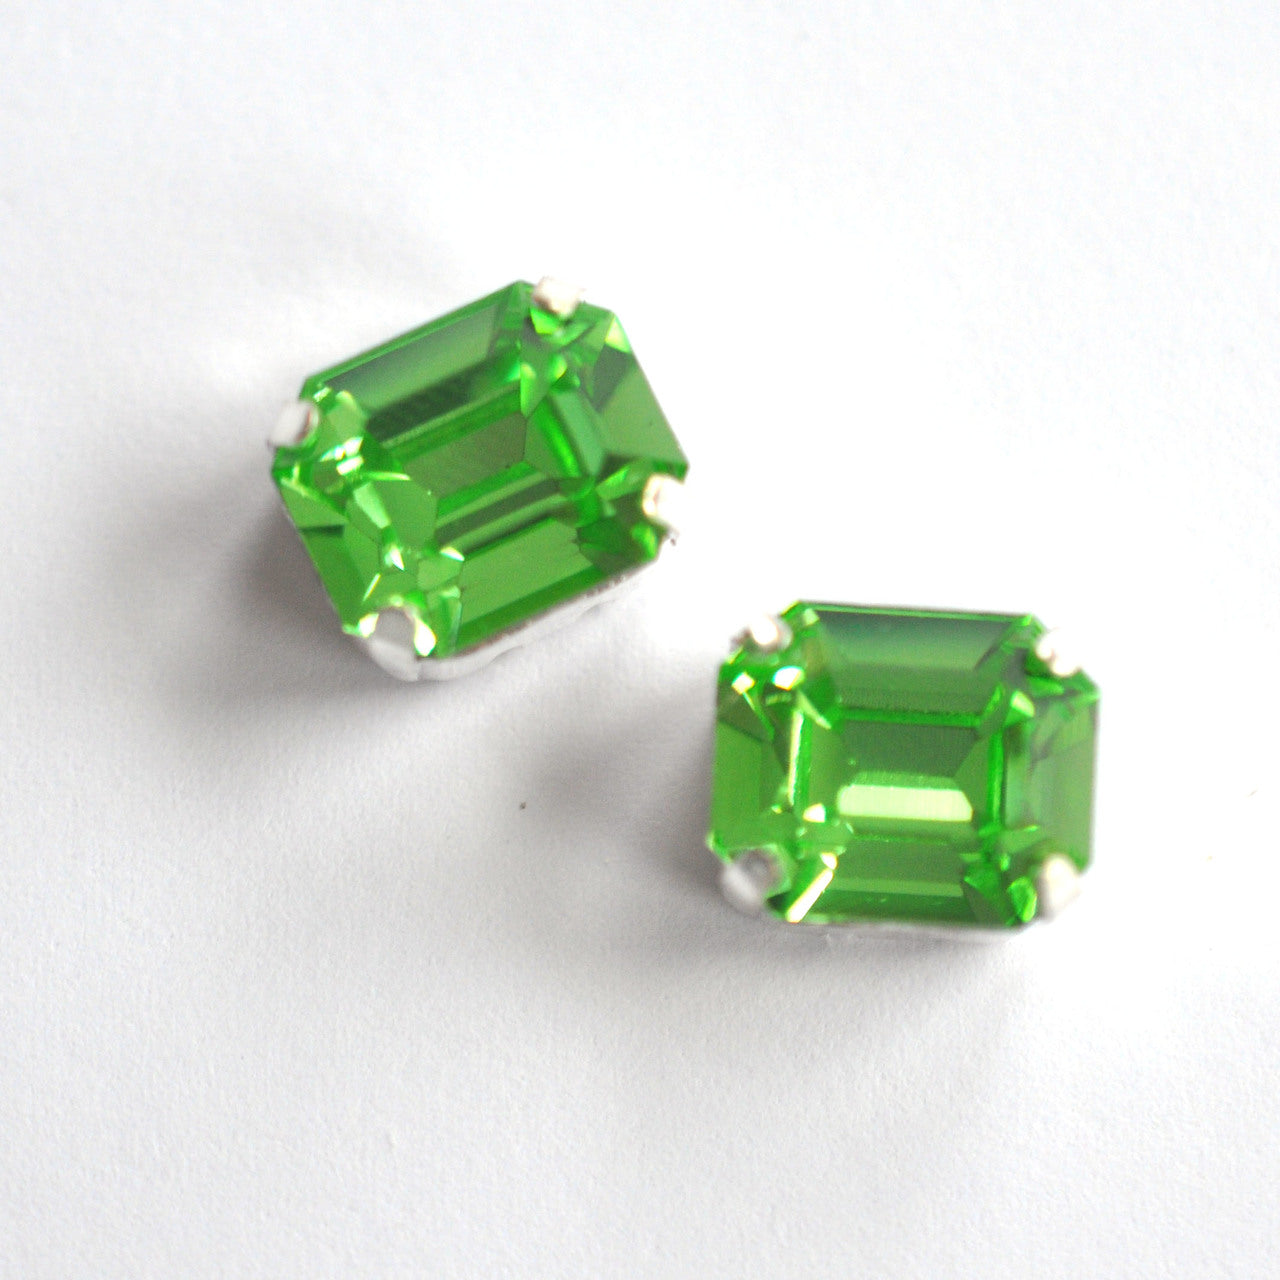 Peridot 12x10mm Octagon Sew On Crystals - 2 Pieces